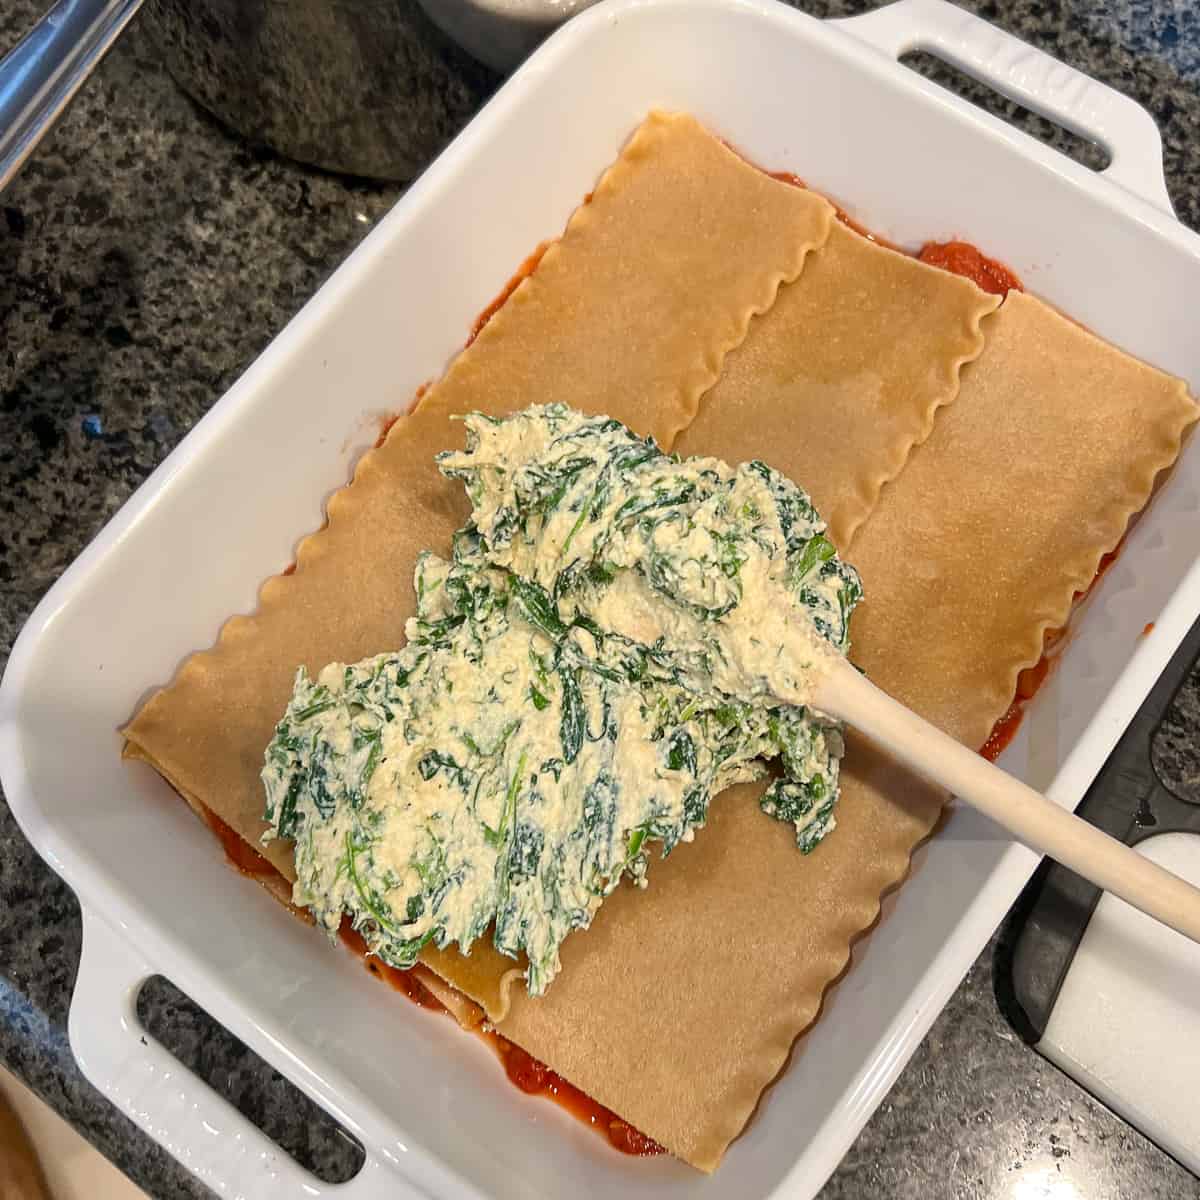 lasagna being assembled with a layer of pasta and ricotta spinach filling being spread across the pasta layer in a white rectangular baking dish